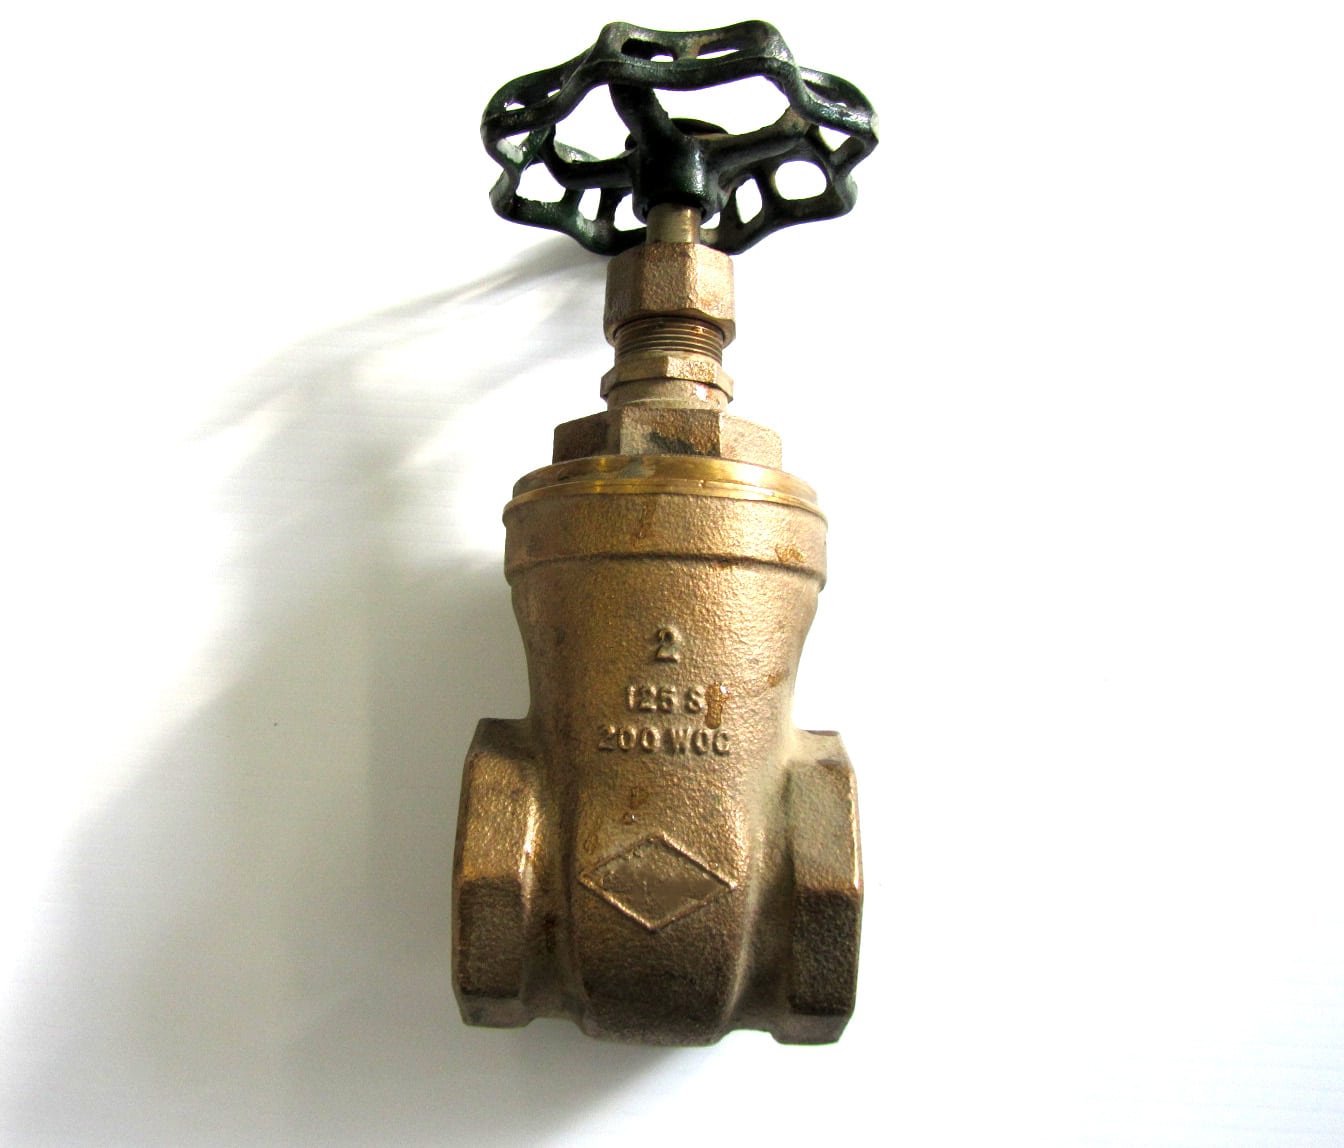 How To Open Or Close A Gate Valve On A Water Line